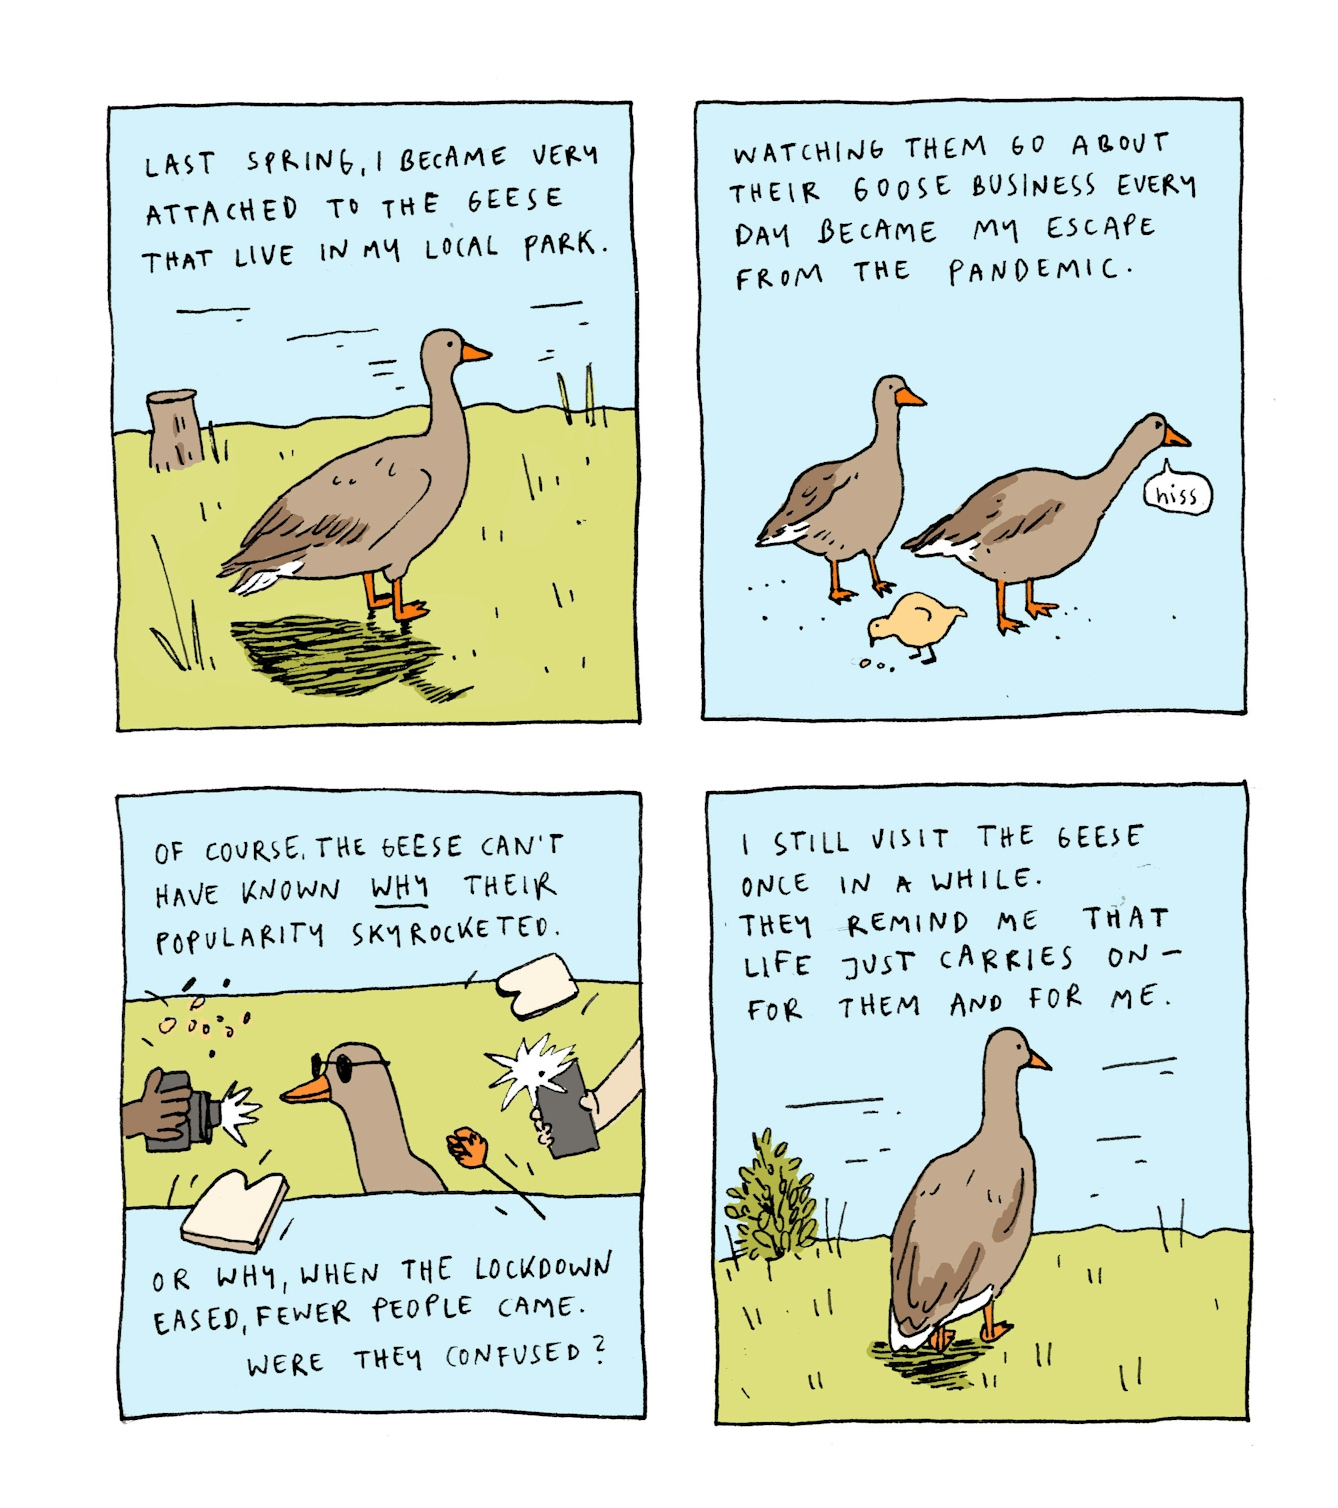 First panel
Text: Last spring I became very attached to the geese that live in my local park.
The drawing shows a greylag goose standing on some grass with water in the background.
Second panel
Text: Watching them go about their goose business every day became my escape from the pandemic.
A whole goose family is shown; a gosling is eating crumbs and one of the adult geese is HISSING.
Third panel
Text: Of course the geese can’t have known WHY their popularity skyrocketed. Or why, when the lockdown eased, fewer people came. Were they confused?  
A goose is at the center of the panel, with a range of objects being thrown at it - bread, seeds, a flower. Phones and cameras are flashing. Wearing sunglasses, the goose looks smug - enjoying its celebrity status.
Fourth panel
Text: I still go and see the geese once in a while. They remind me that life just carries on, for them and for me.
A goose is again standing in a park. This time its back is turned to the observer, looking out at the water.